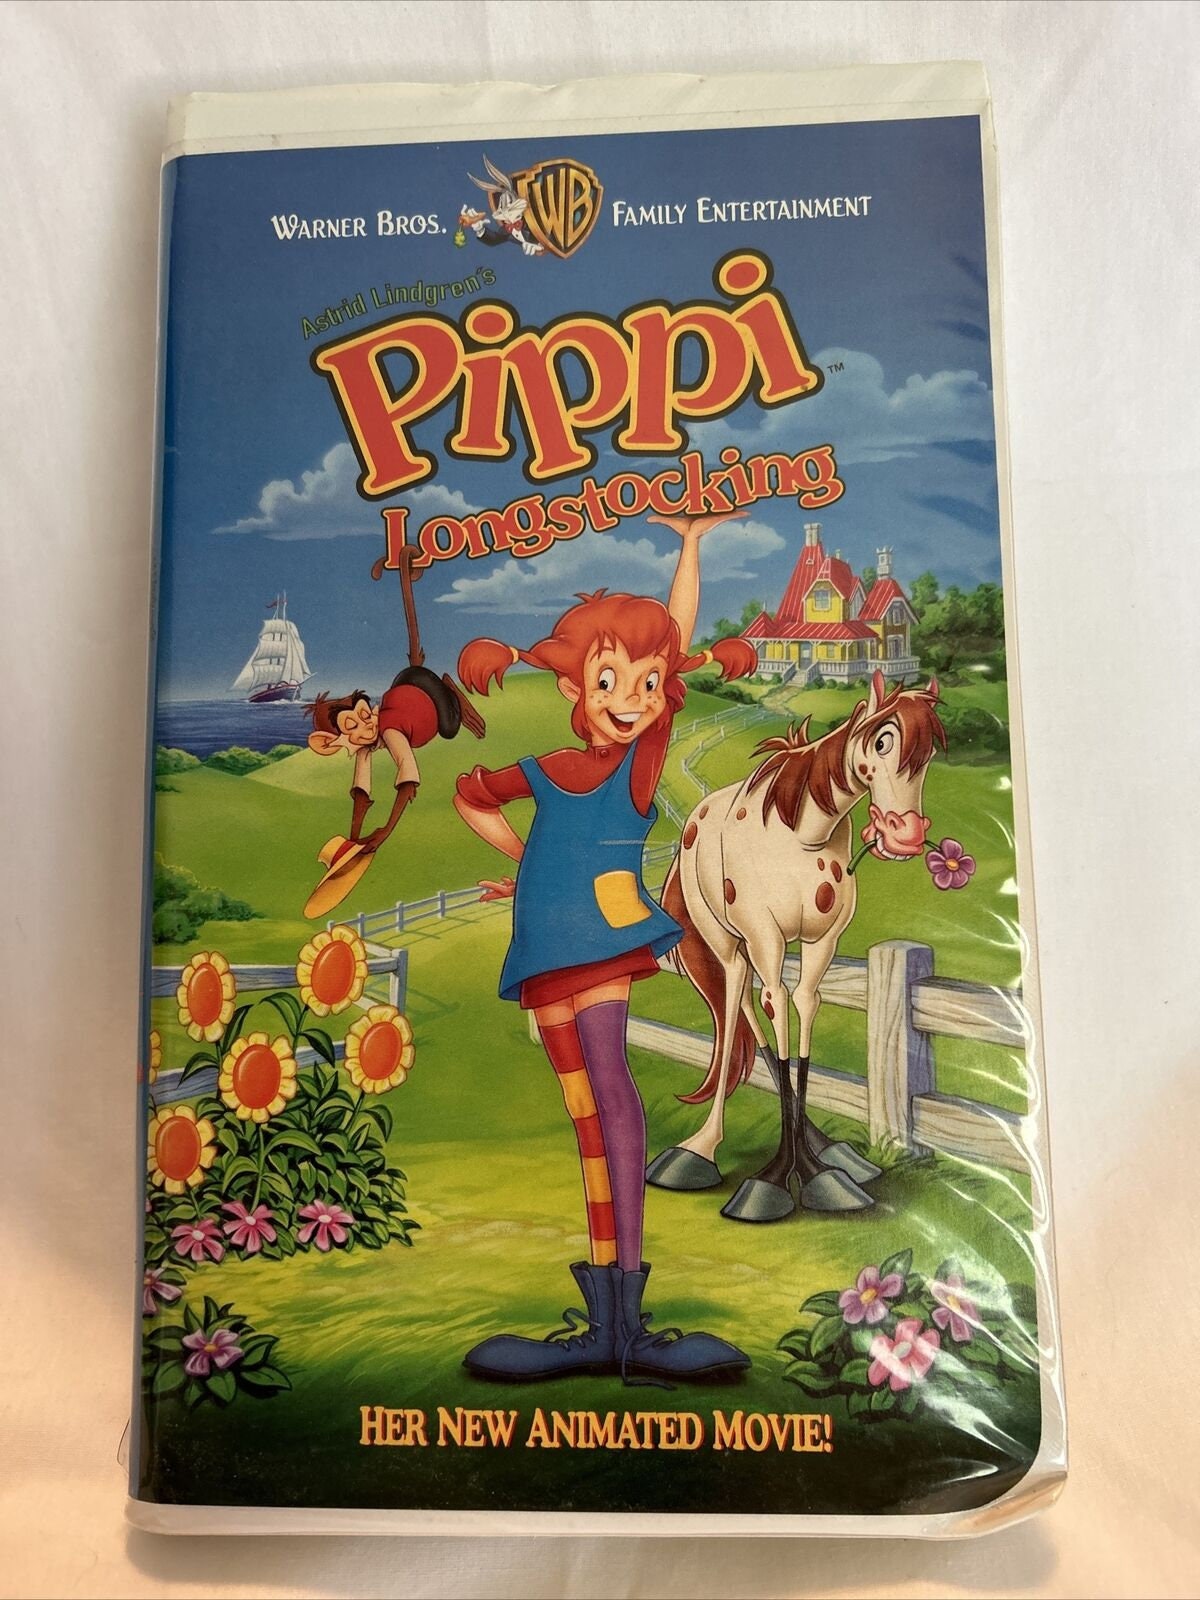 charles wich recommends Pippi Longstockings Cartoon Movie